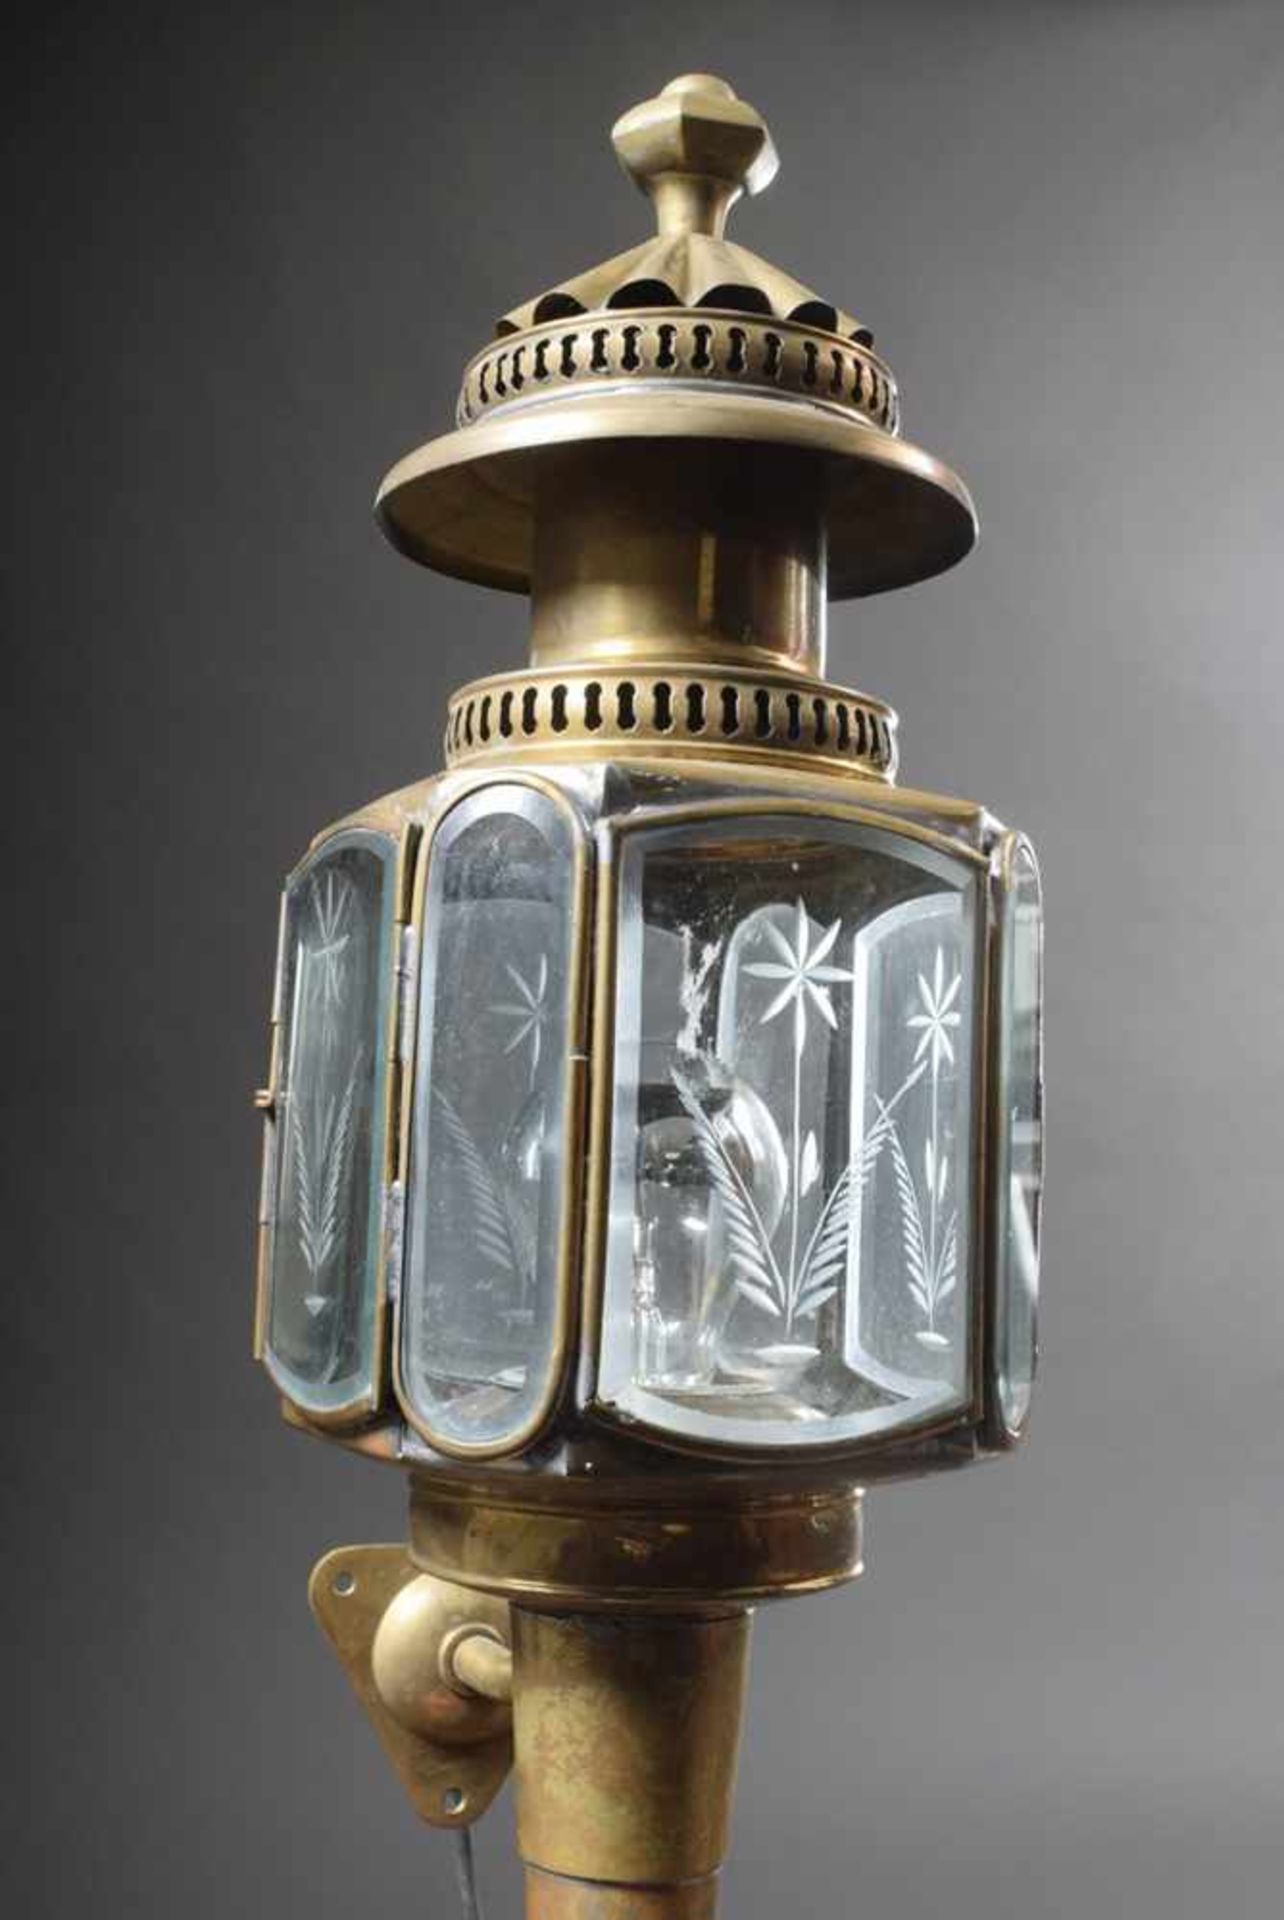 Pair of "Carriage" lanterns with floral cut glasses in brass mounting, electrified, l. 53cm, - Bild 2 aus 2